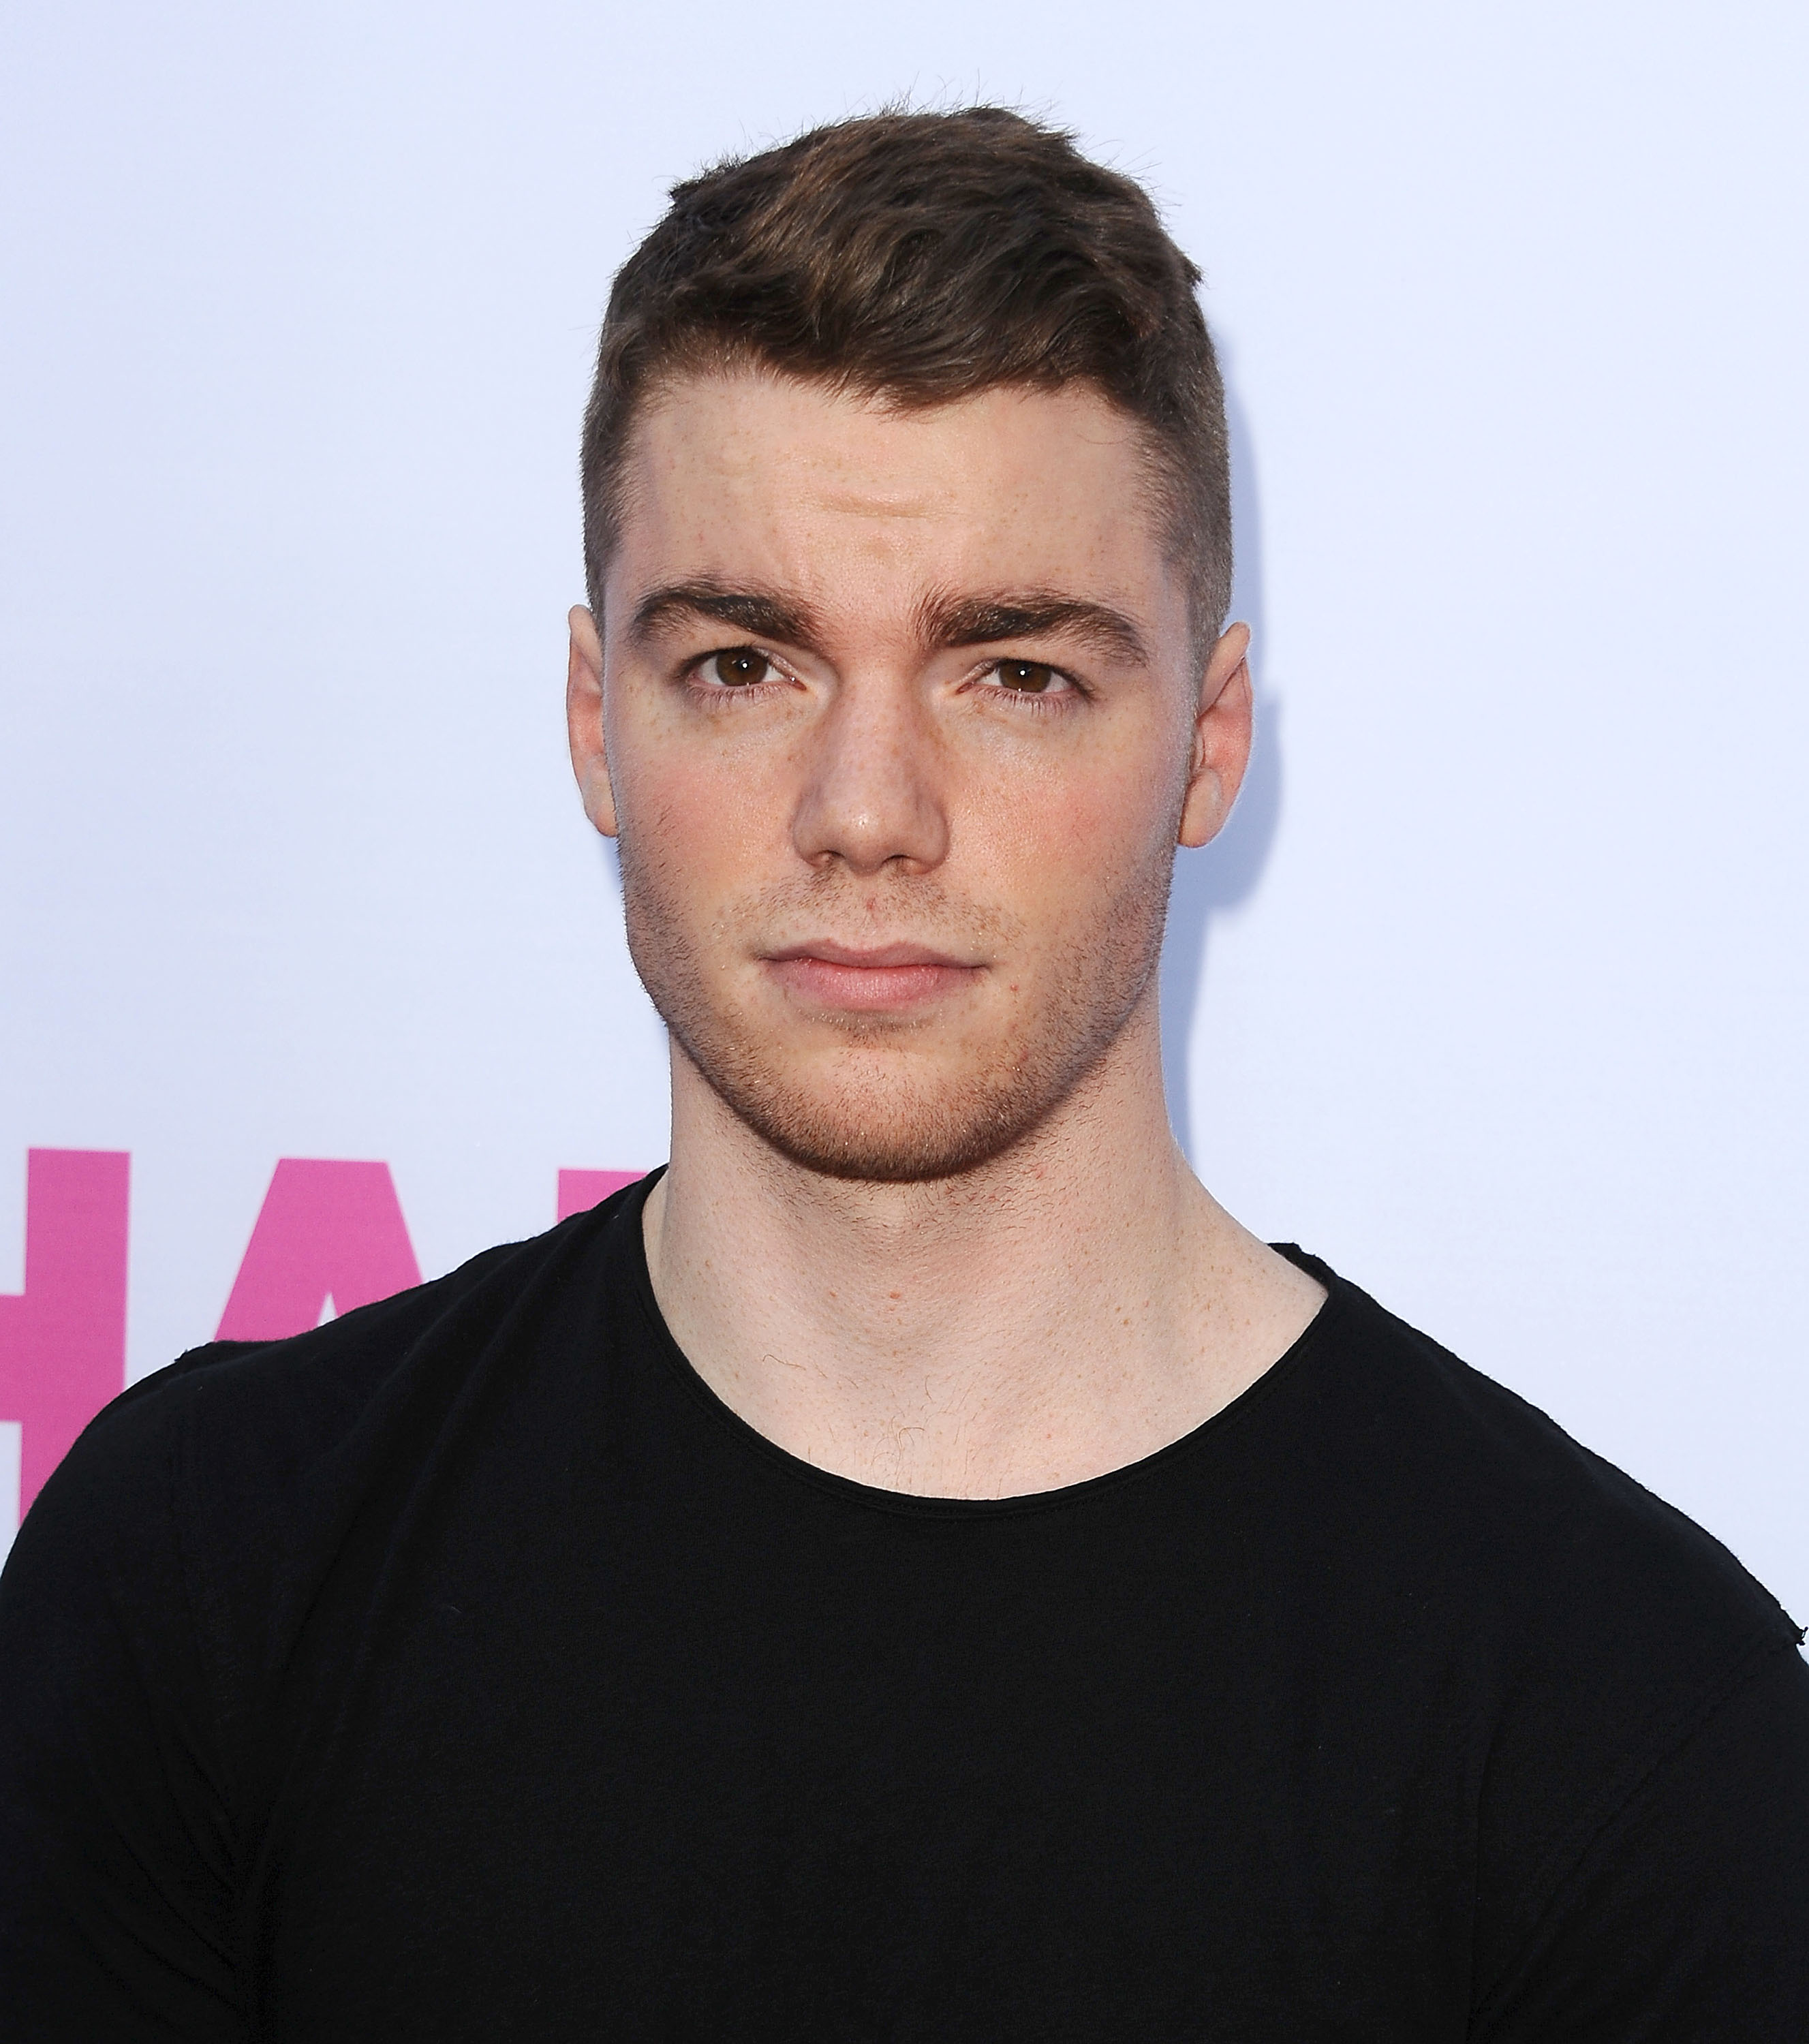 Gabriel Basso attends the premiere of "Barely Lethal" at ArcLight Hollywood on May 27, 2015, in Hollywood, California. | Source: Getty Images